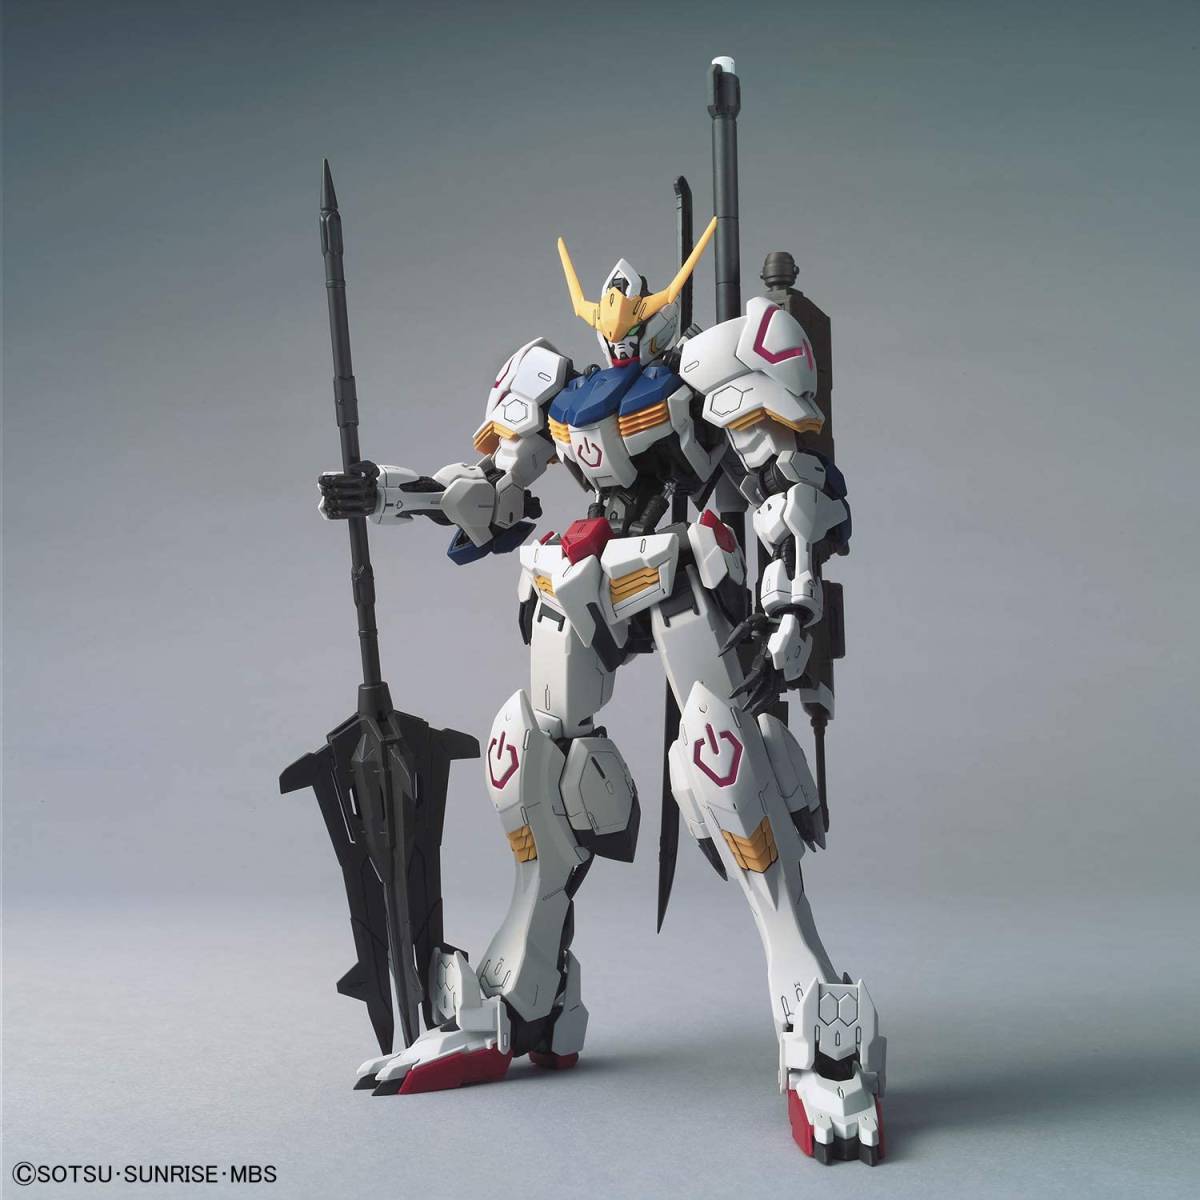 Mg 1 100 ガンプラ 機動戦士ガンダム 鉄血のオルフェンズ ガンダムバルバトス 完成品 制作代行 Product Details Yahoo Auctions Japan Proxy Bidding And Shopping Service From Japan